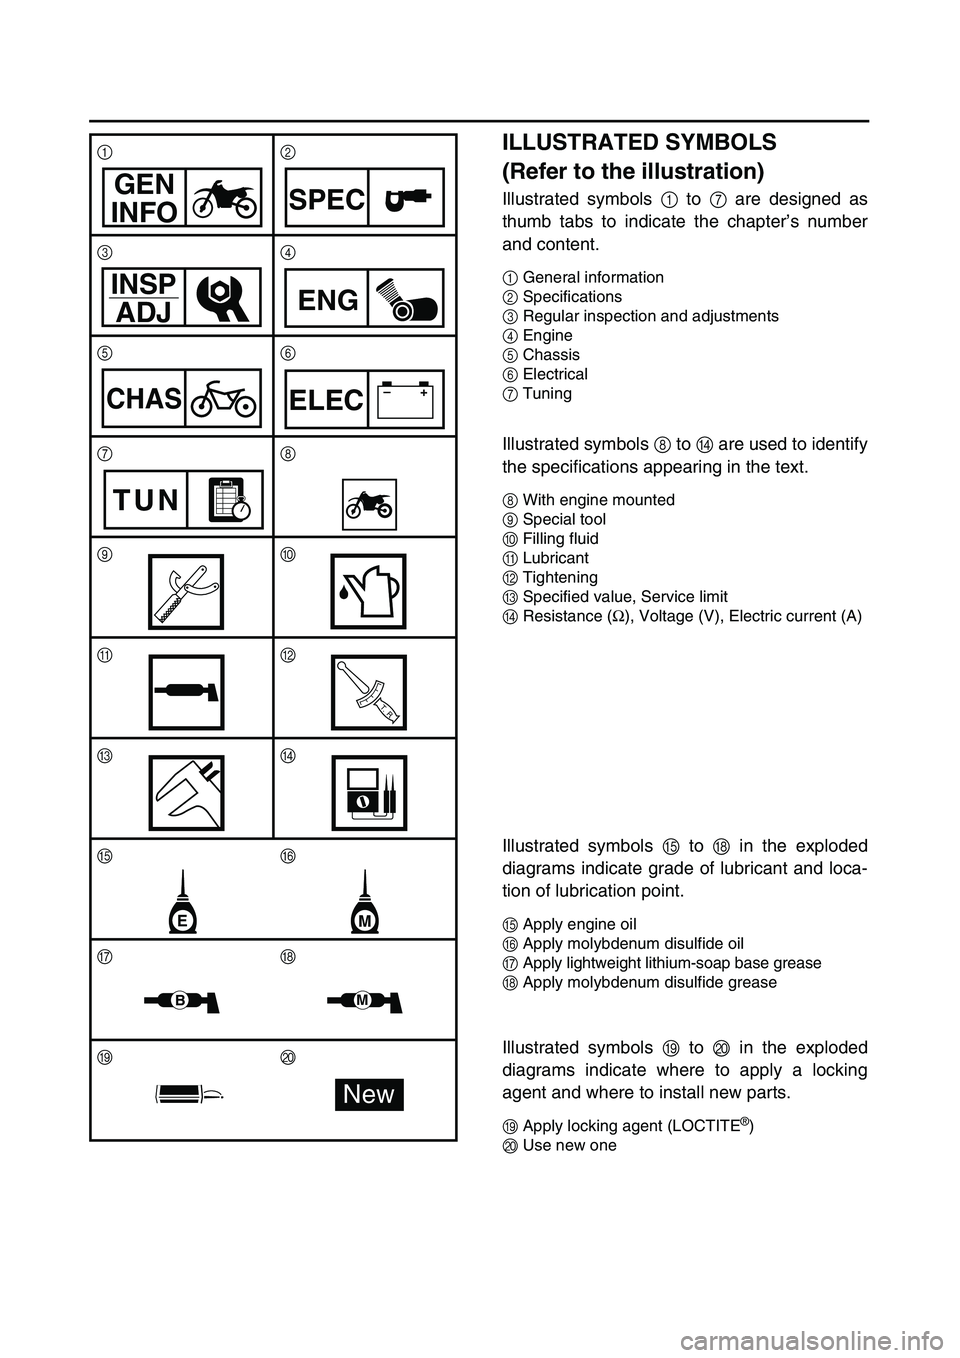 YAMAHA WR 450F 2003  Owners Manual  
ILLUSTRATED SYMBOLS 
(Refer to the illustration) 
Illustrated symbols   
1  
 to   
7  
 are designed as
thumb tabs to indicate the chapter’s number
and content. 
1  
General information  
2  
Spe